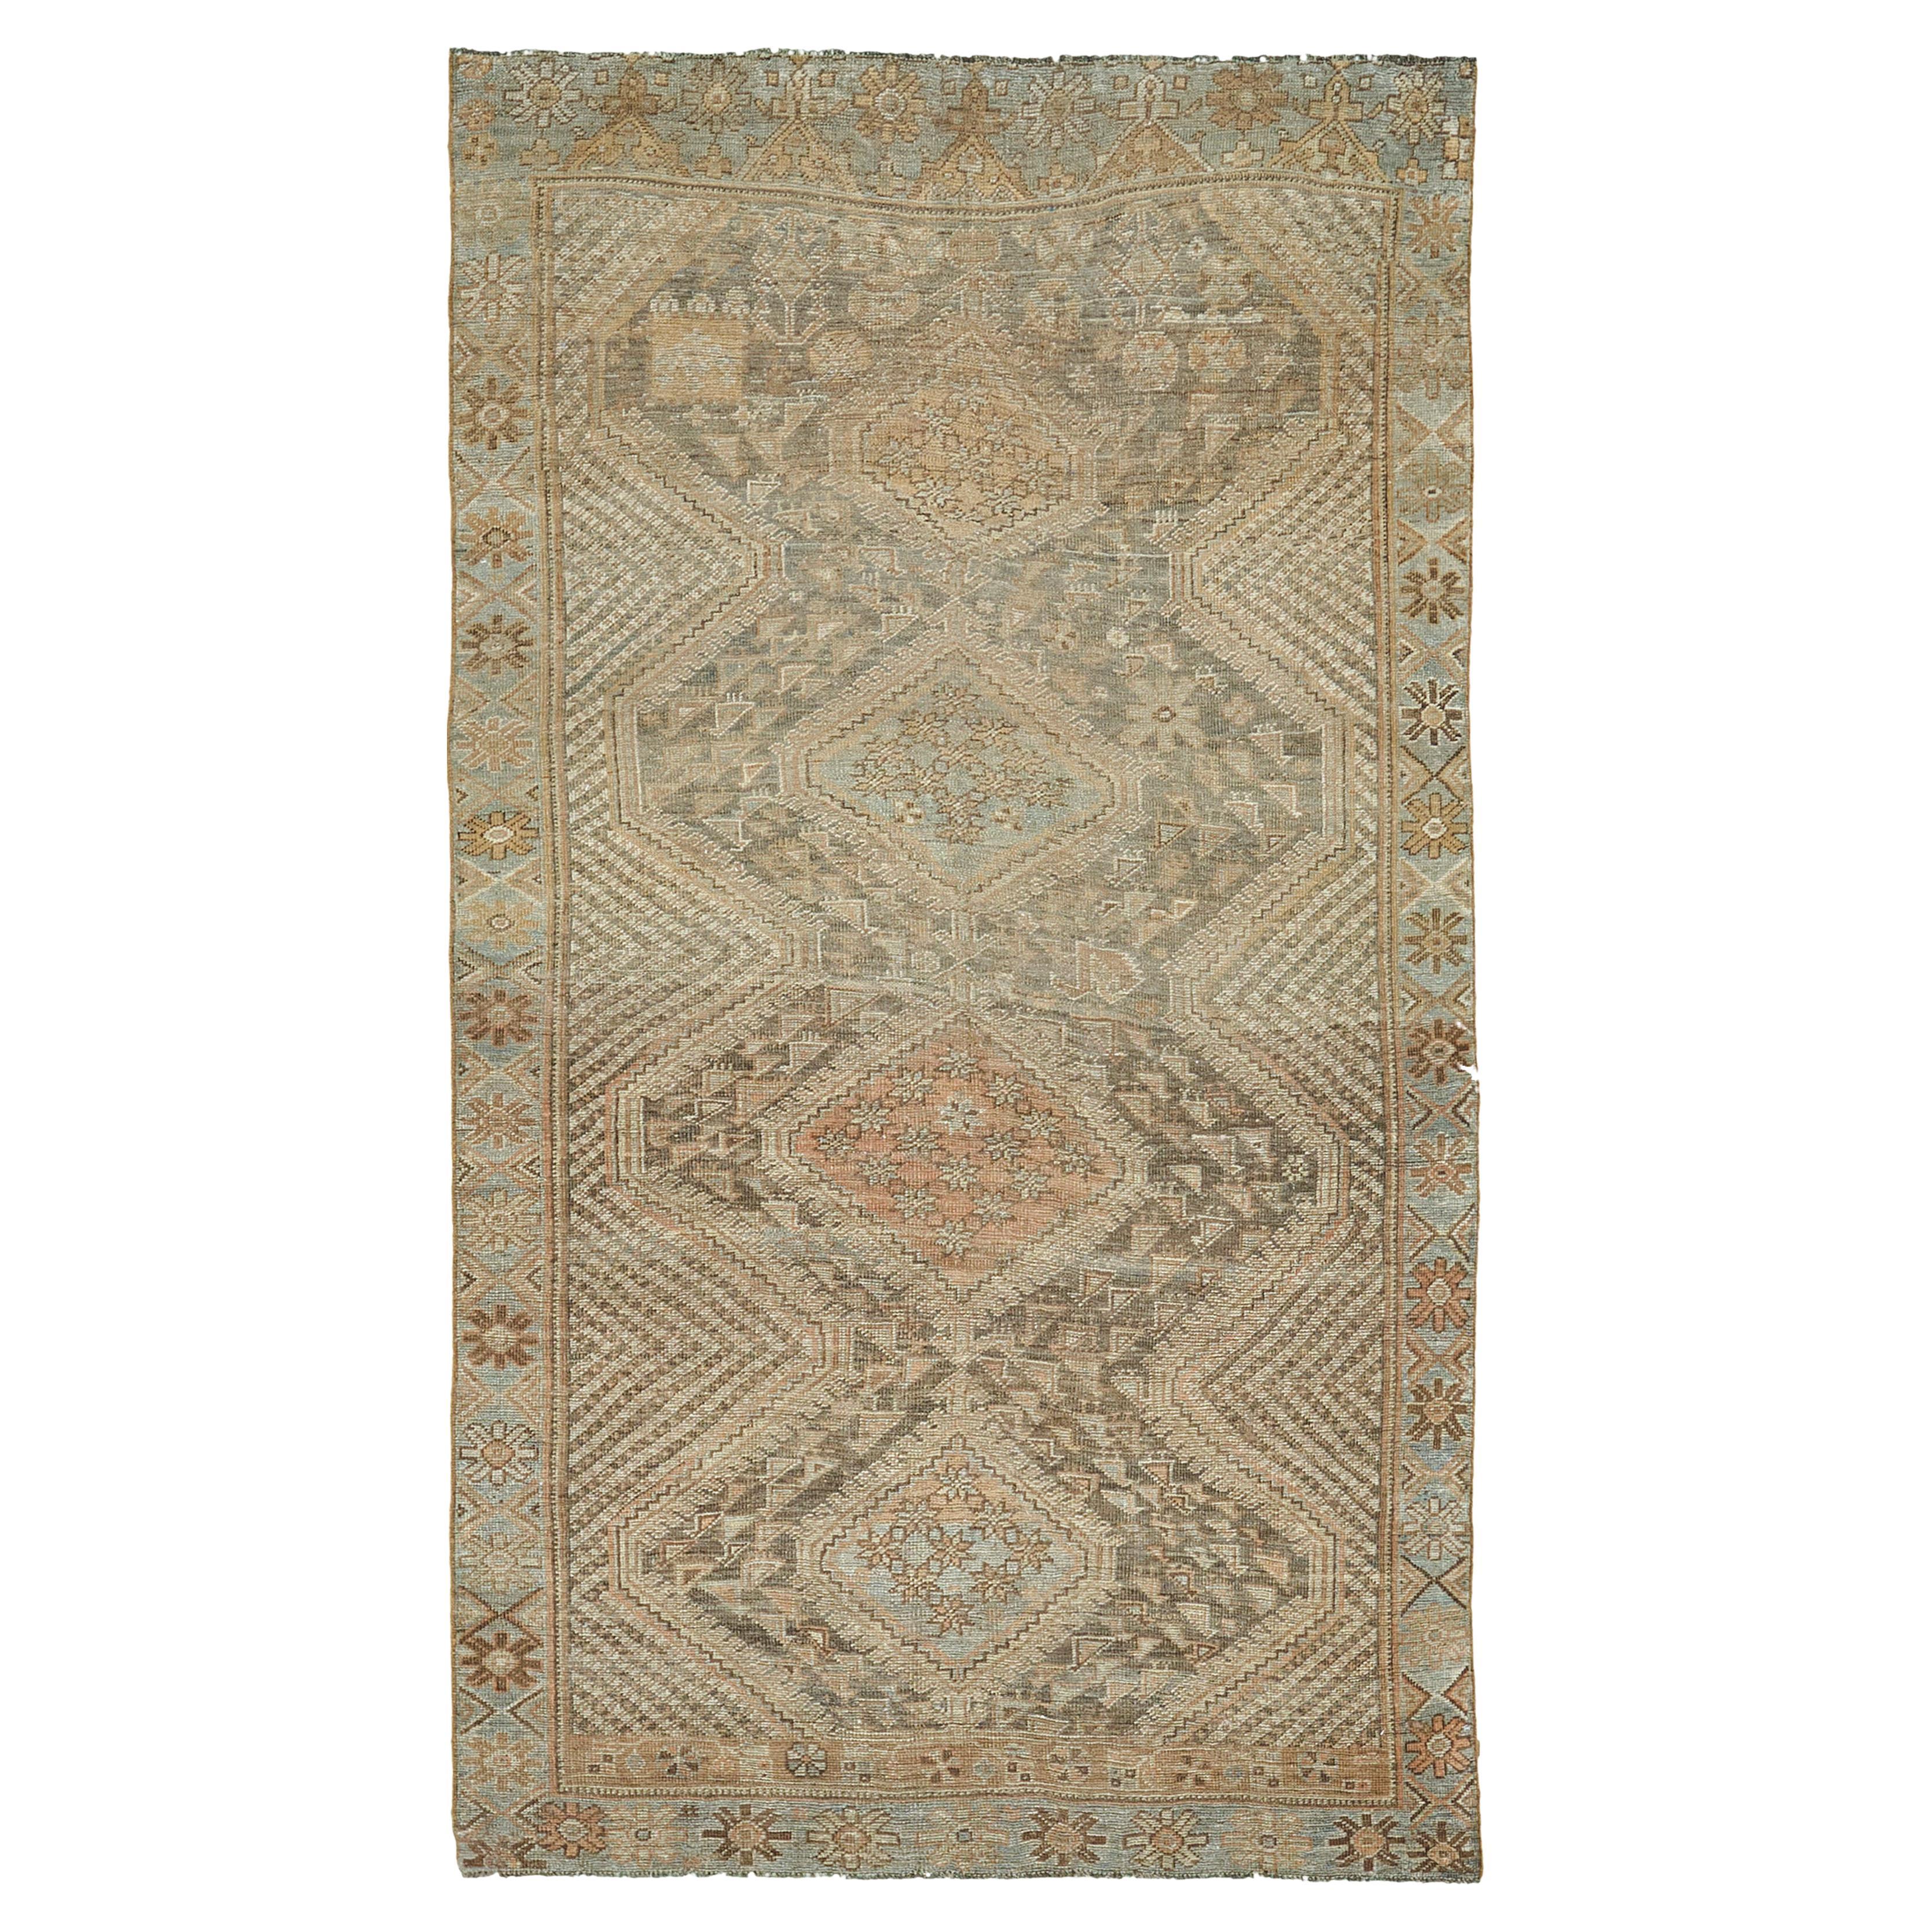 Antique Persian Ghashghaie by Mehraban Rugs